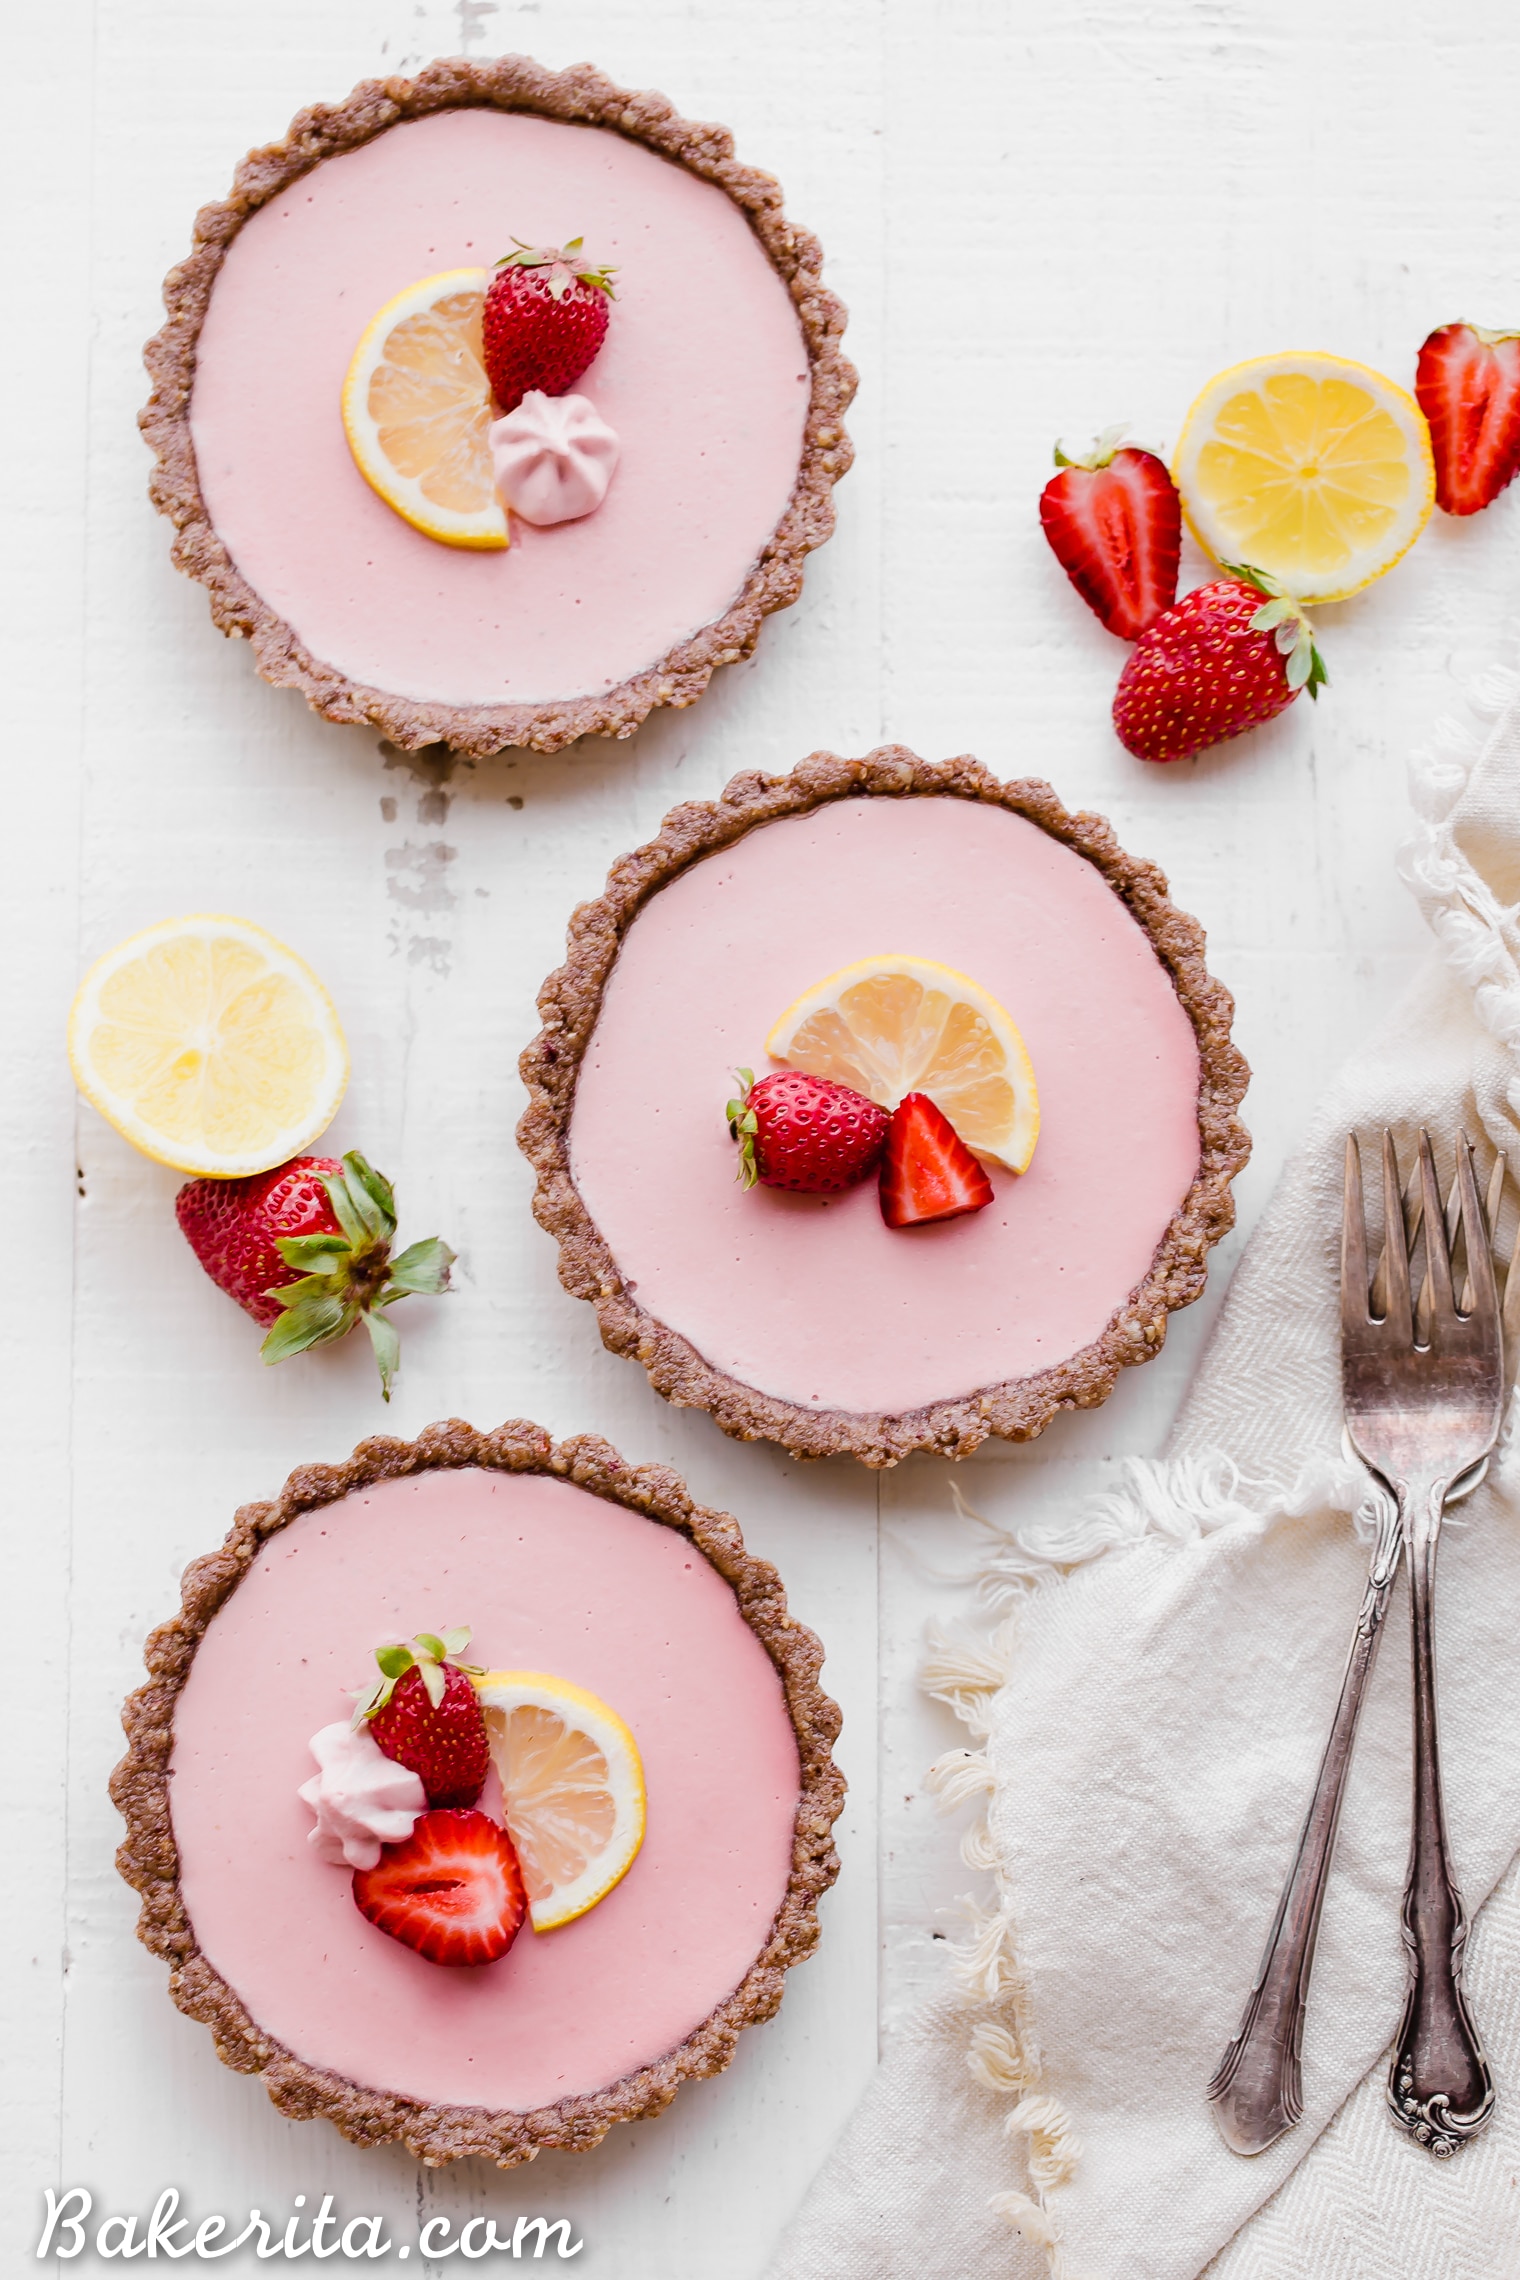 These No Bake Strawberry Lemonade Tarts have a raw "graham cracker" style crust filled with a super refreshing strawberry lemonade filling. These are SO good frozen on a hot day and they're gluten-free, paleo and vegan.